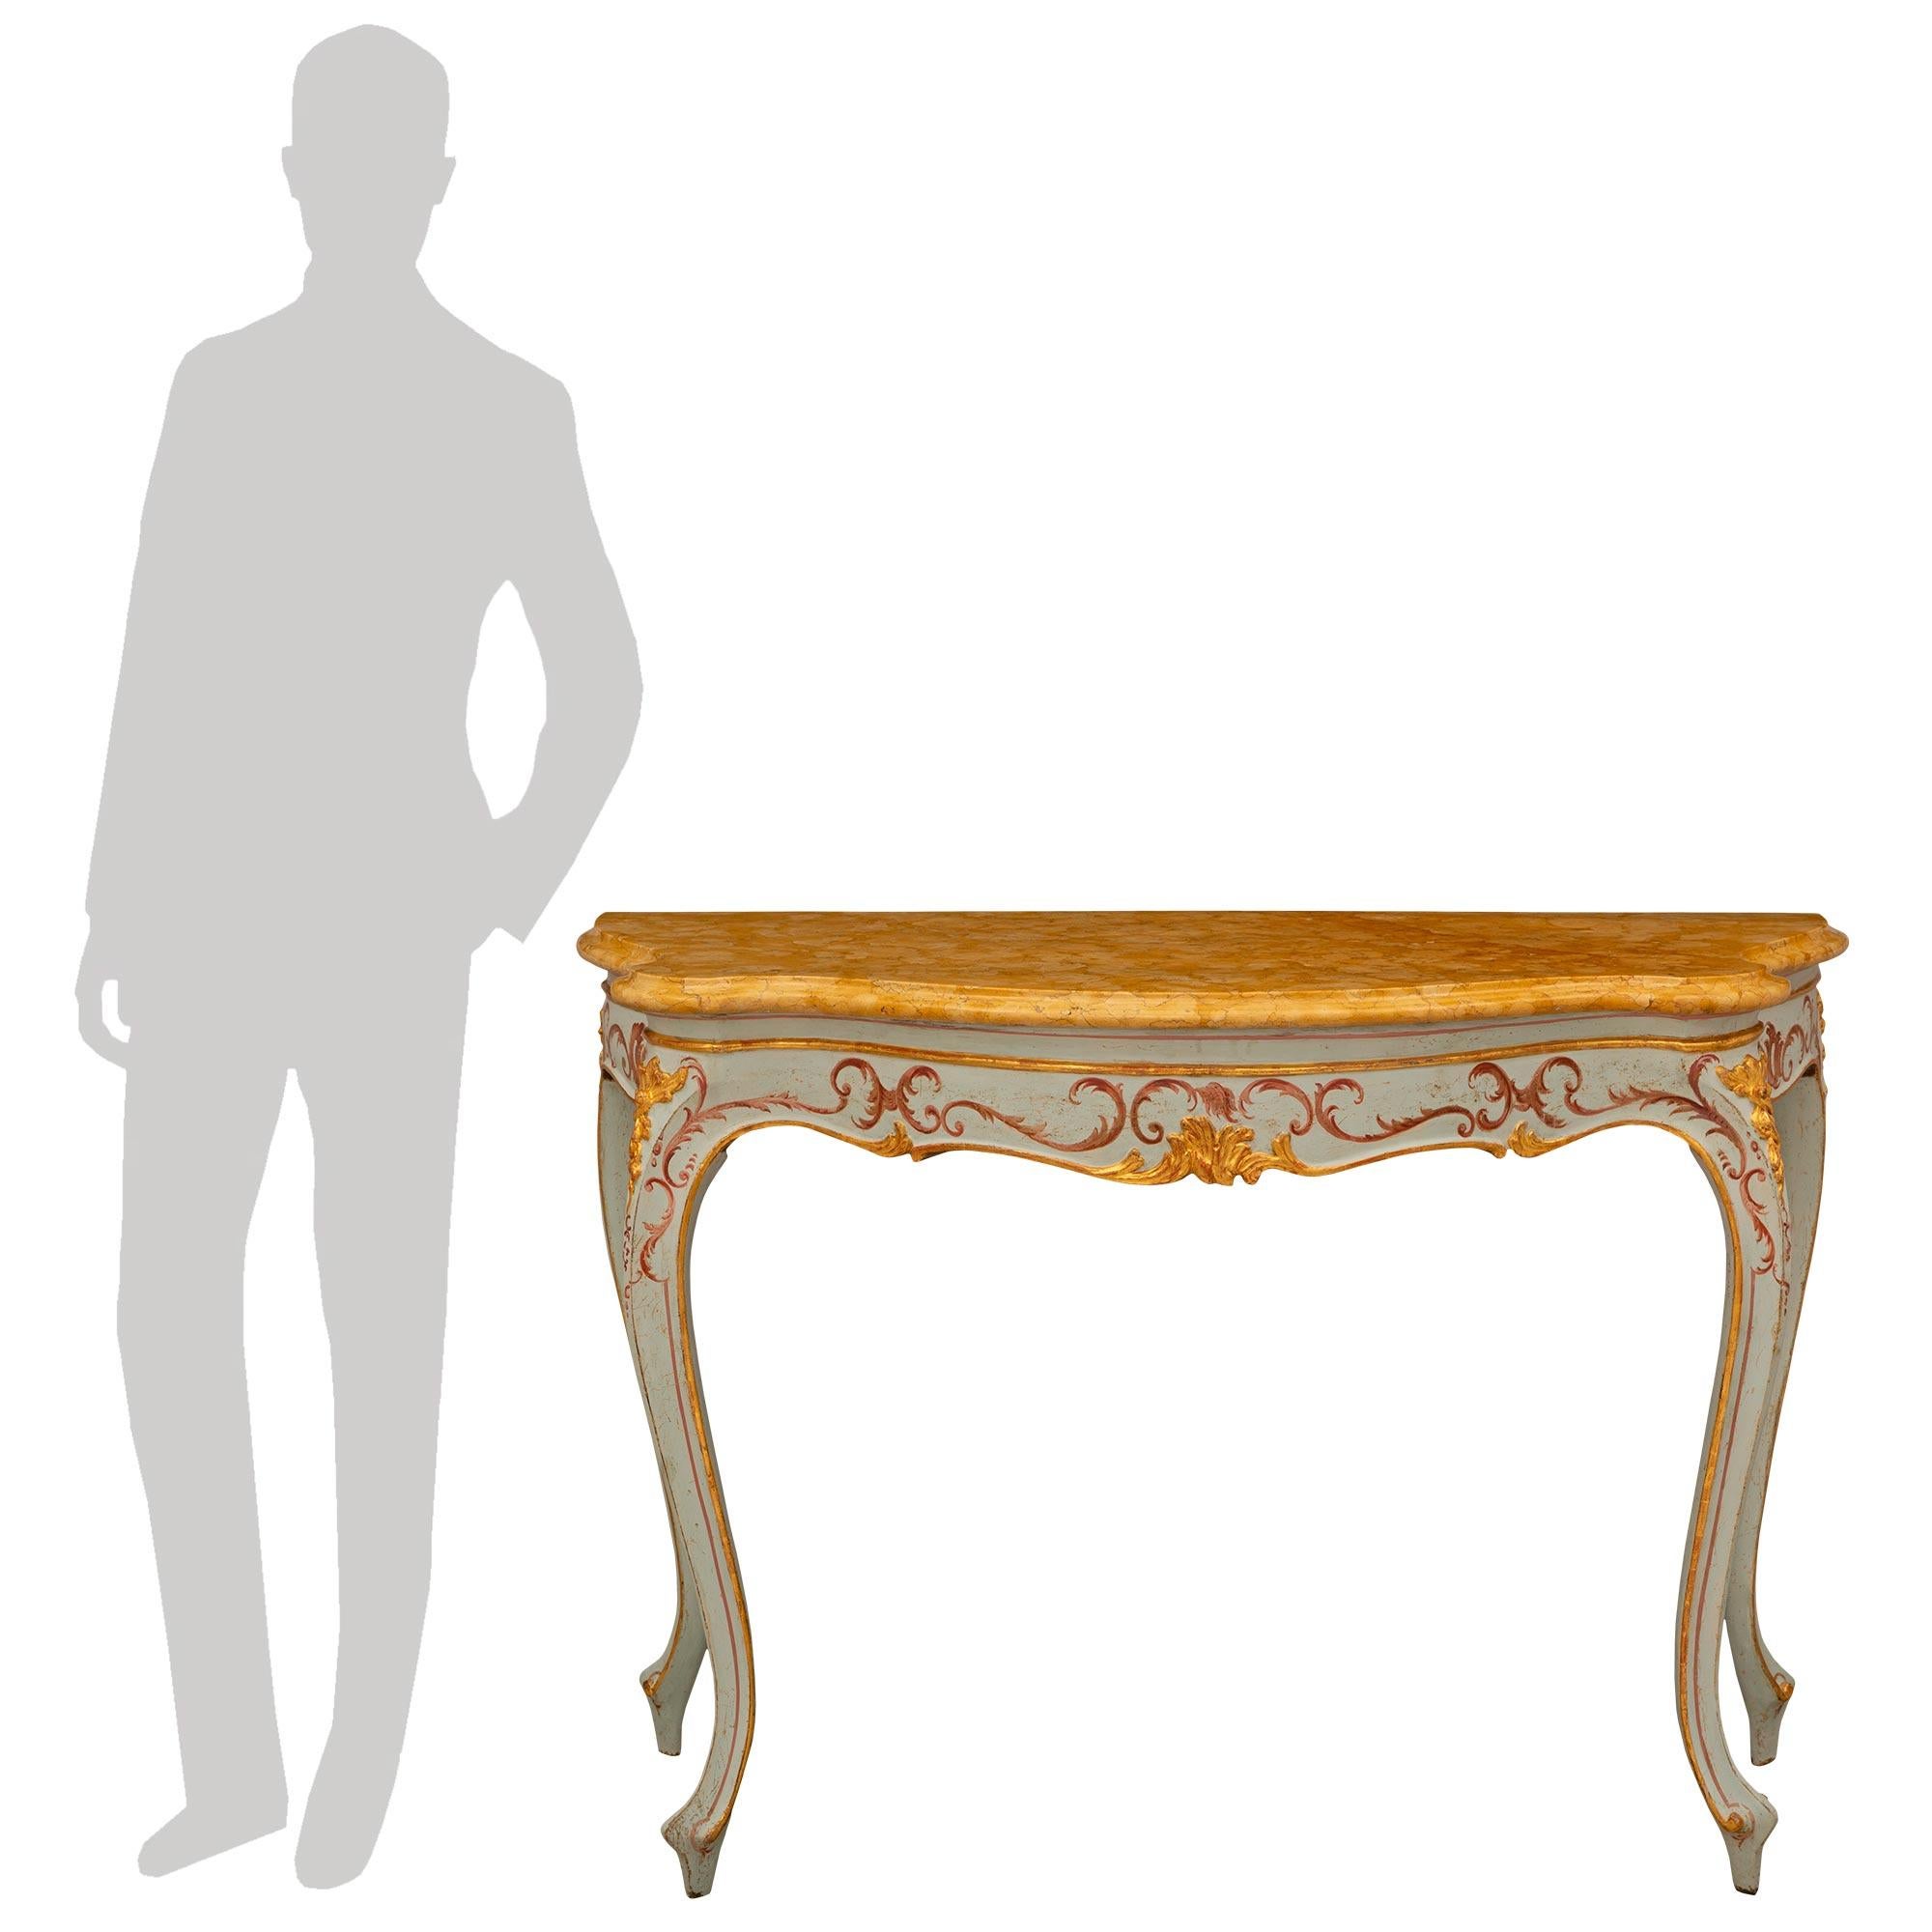 A beautiful and most decorative pair of Italian 18th century Venetian st. Giltwood, patinated wood and Sienna marble consoles. Each freestanding console is raised by elegant Giltwood cabriole legs with scrolled feet, superb hand painted designs, and